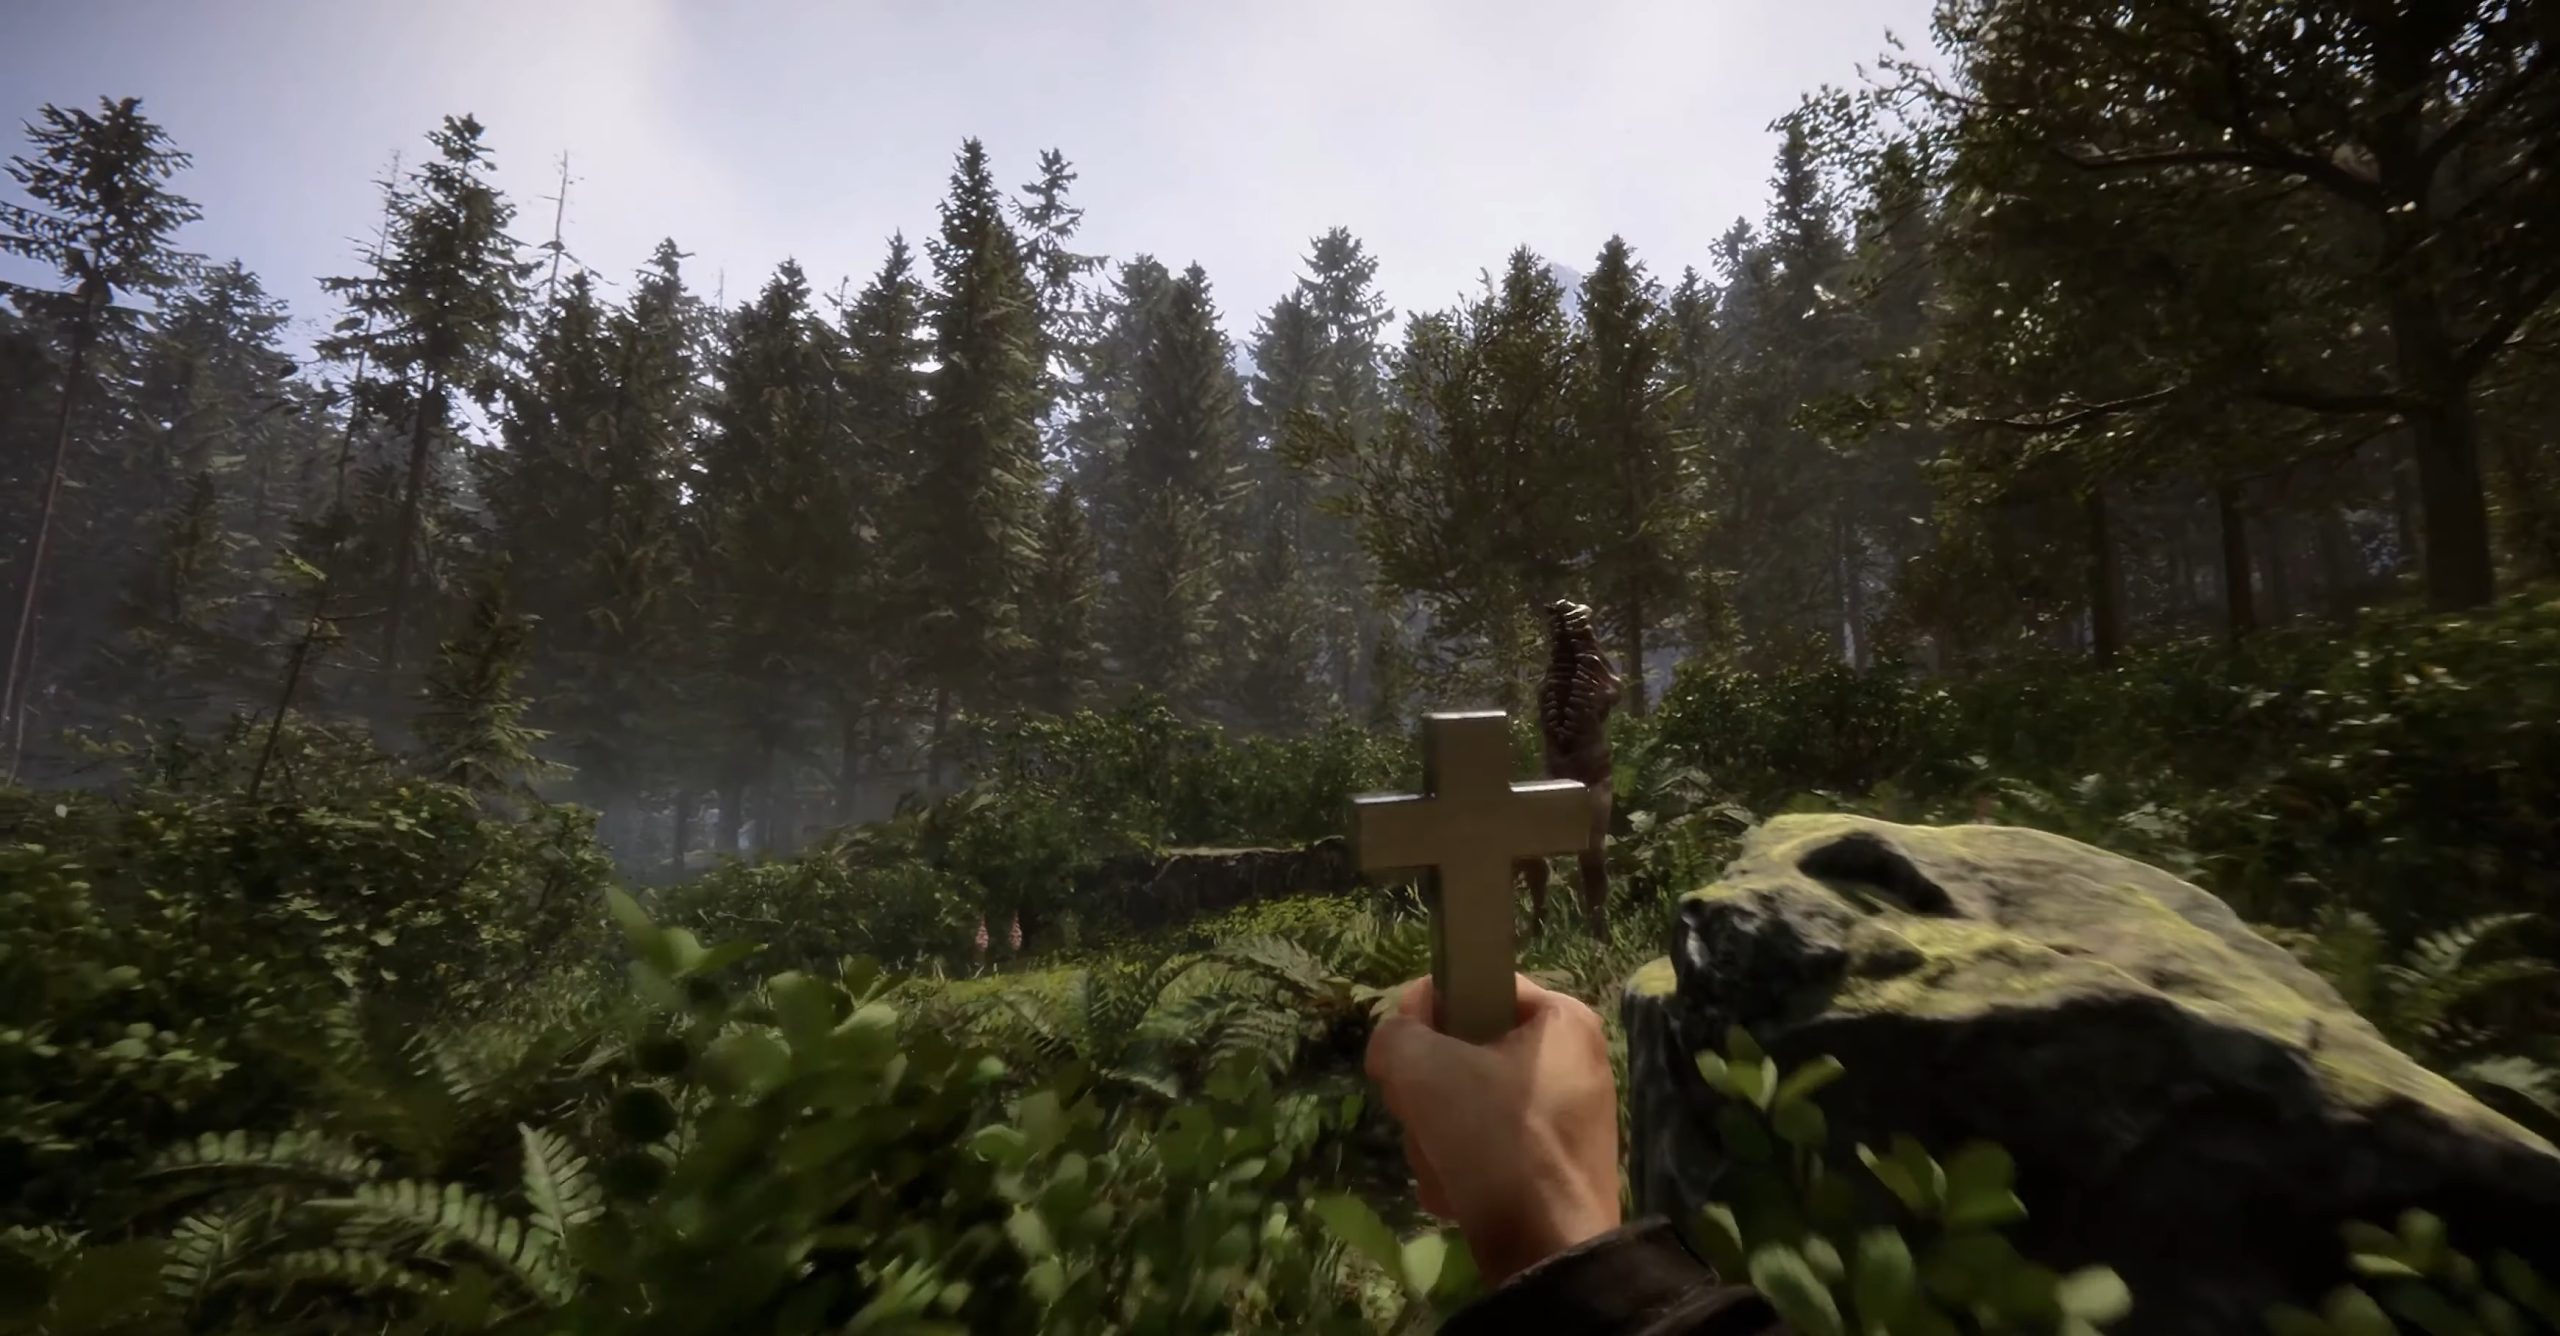 Sons of the Forest devs talk Kelvin and Virginia, GPS, and log sleds